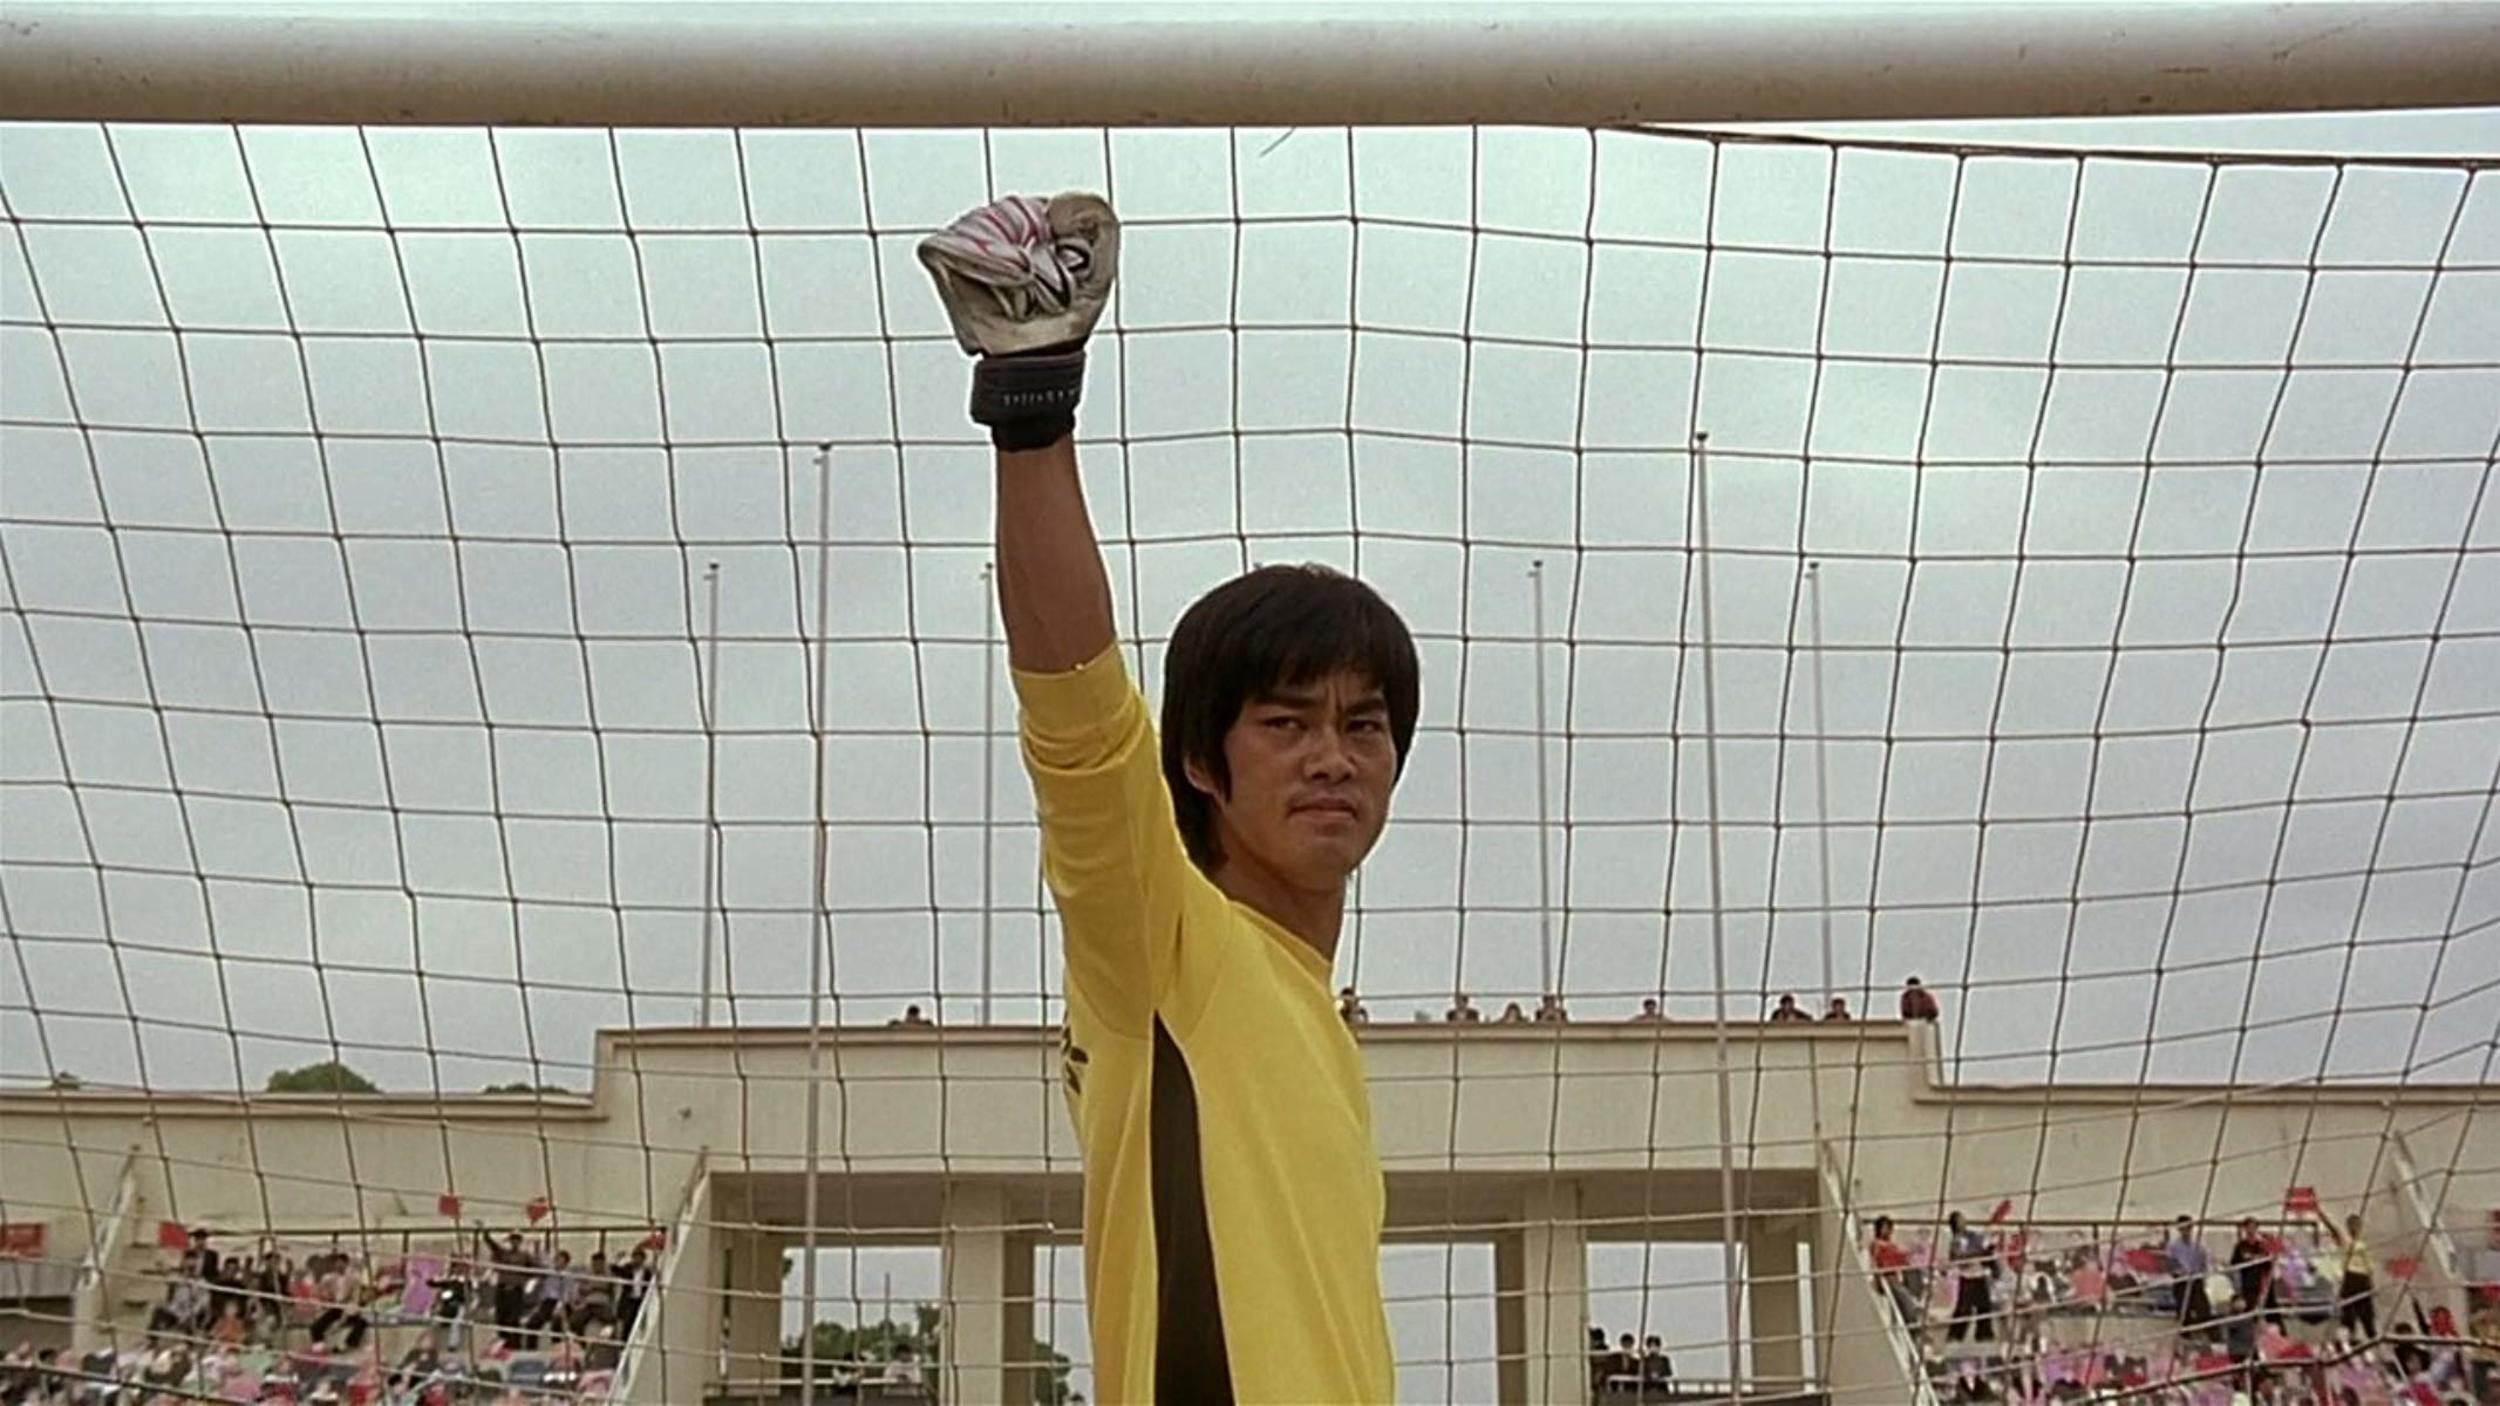 <p>“Shaolin Soccer” is on the opposite side of the verisimilitude equation from “Miracle.” It’s basically a live-action cartoon. Stephen Chow doesn’t care about making a realistic sports movie. He just wanted to do his usual crazy action within the realm of sports. And it works.</p><p><a href='https://www.msn.com/en-us/community/channel/vid-cj9pqbr0vn9in2b6ddcd8sfgpfq6x6utp44fssrv6mc2gtybw0us'>Follow us on MSN to see more of our exclusive entertainment content.</a></p>